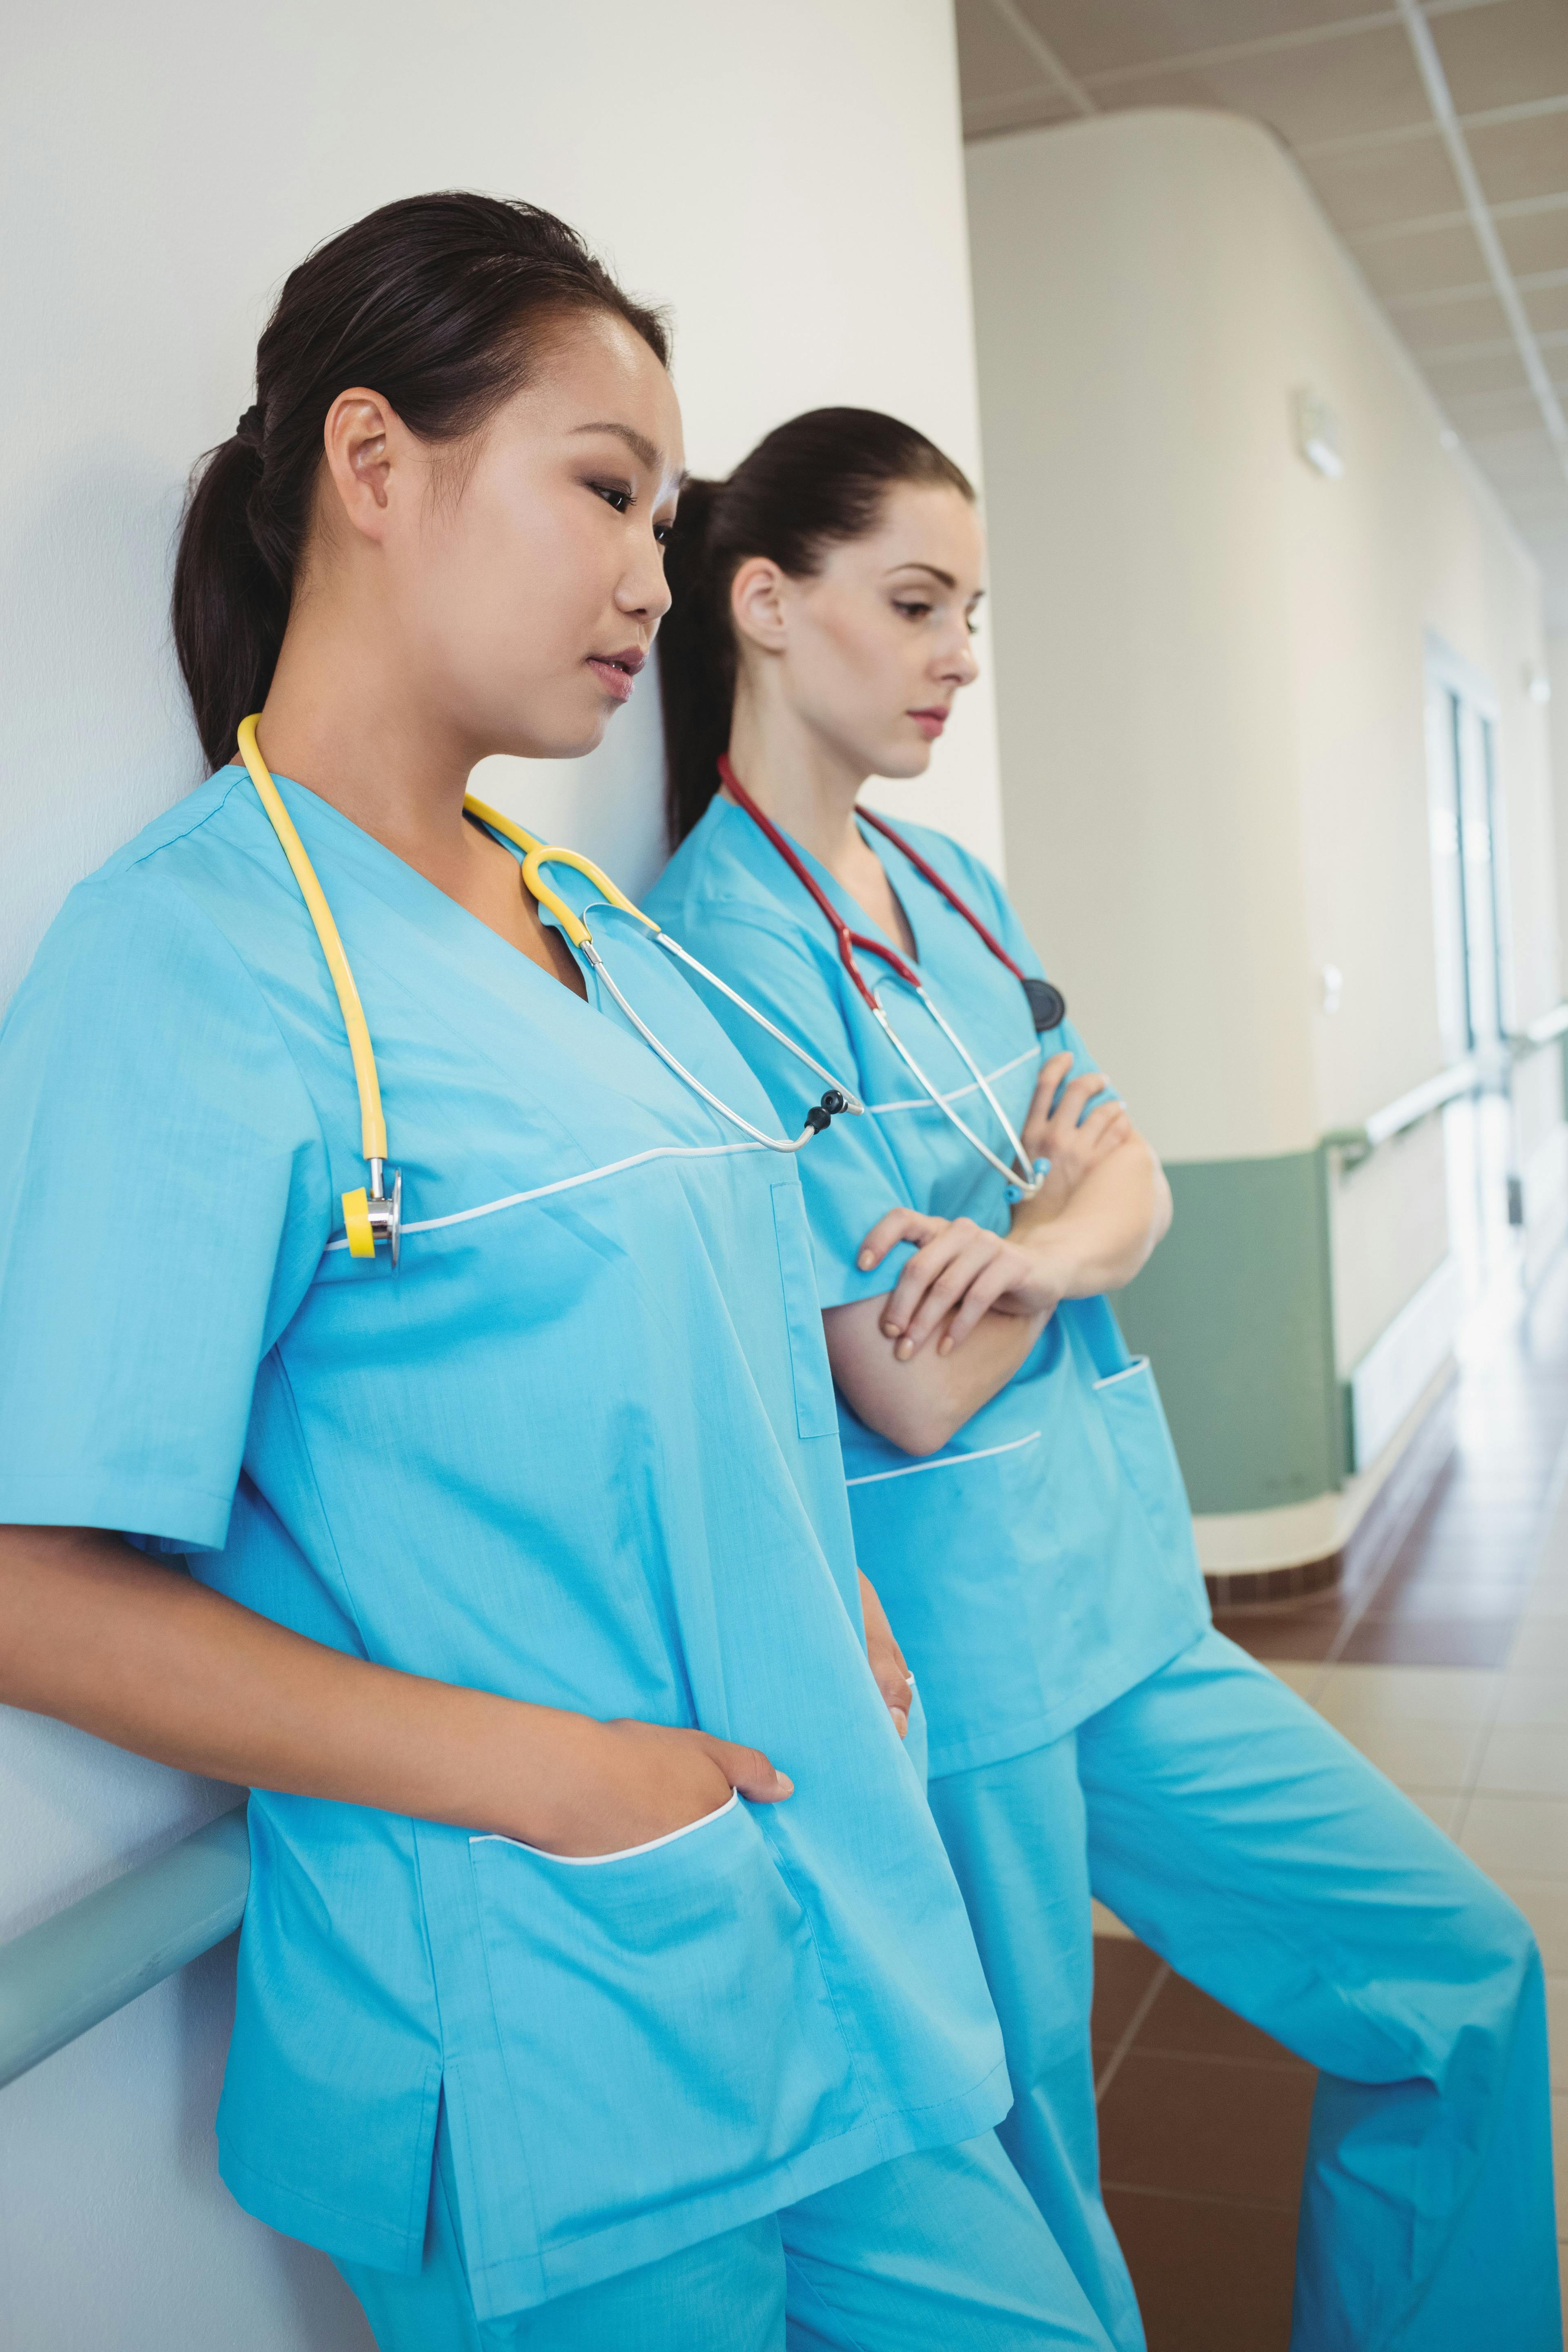   Empowering the Next Generation of Nurse Leaders